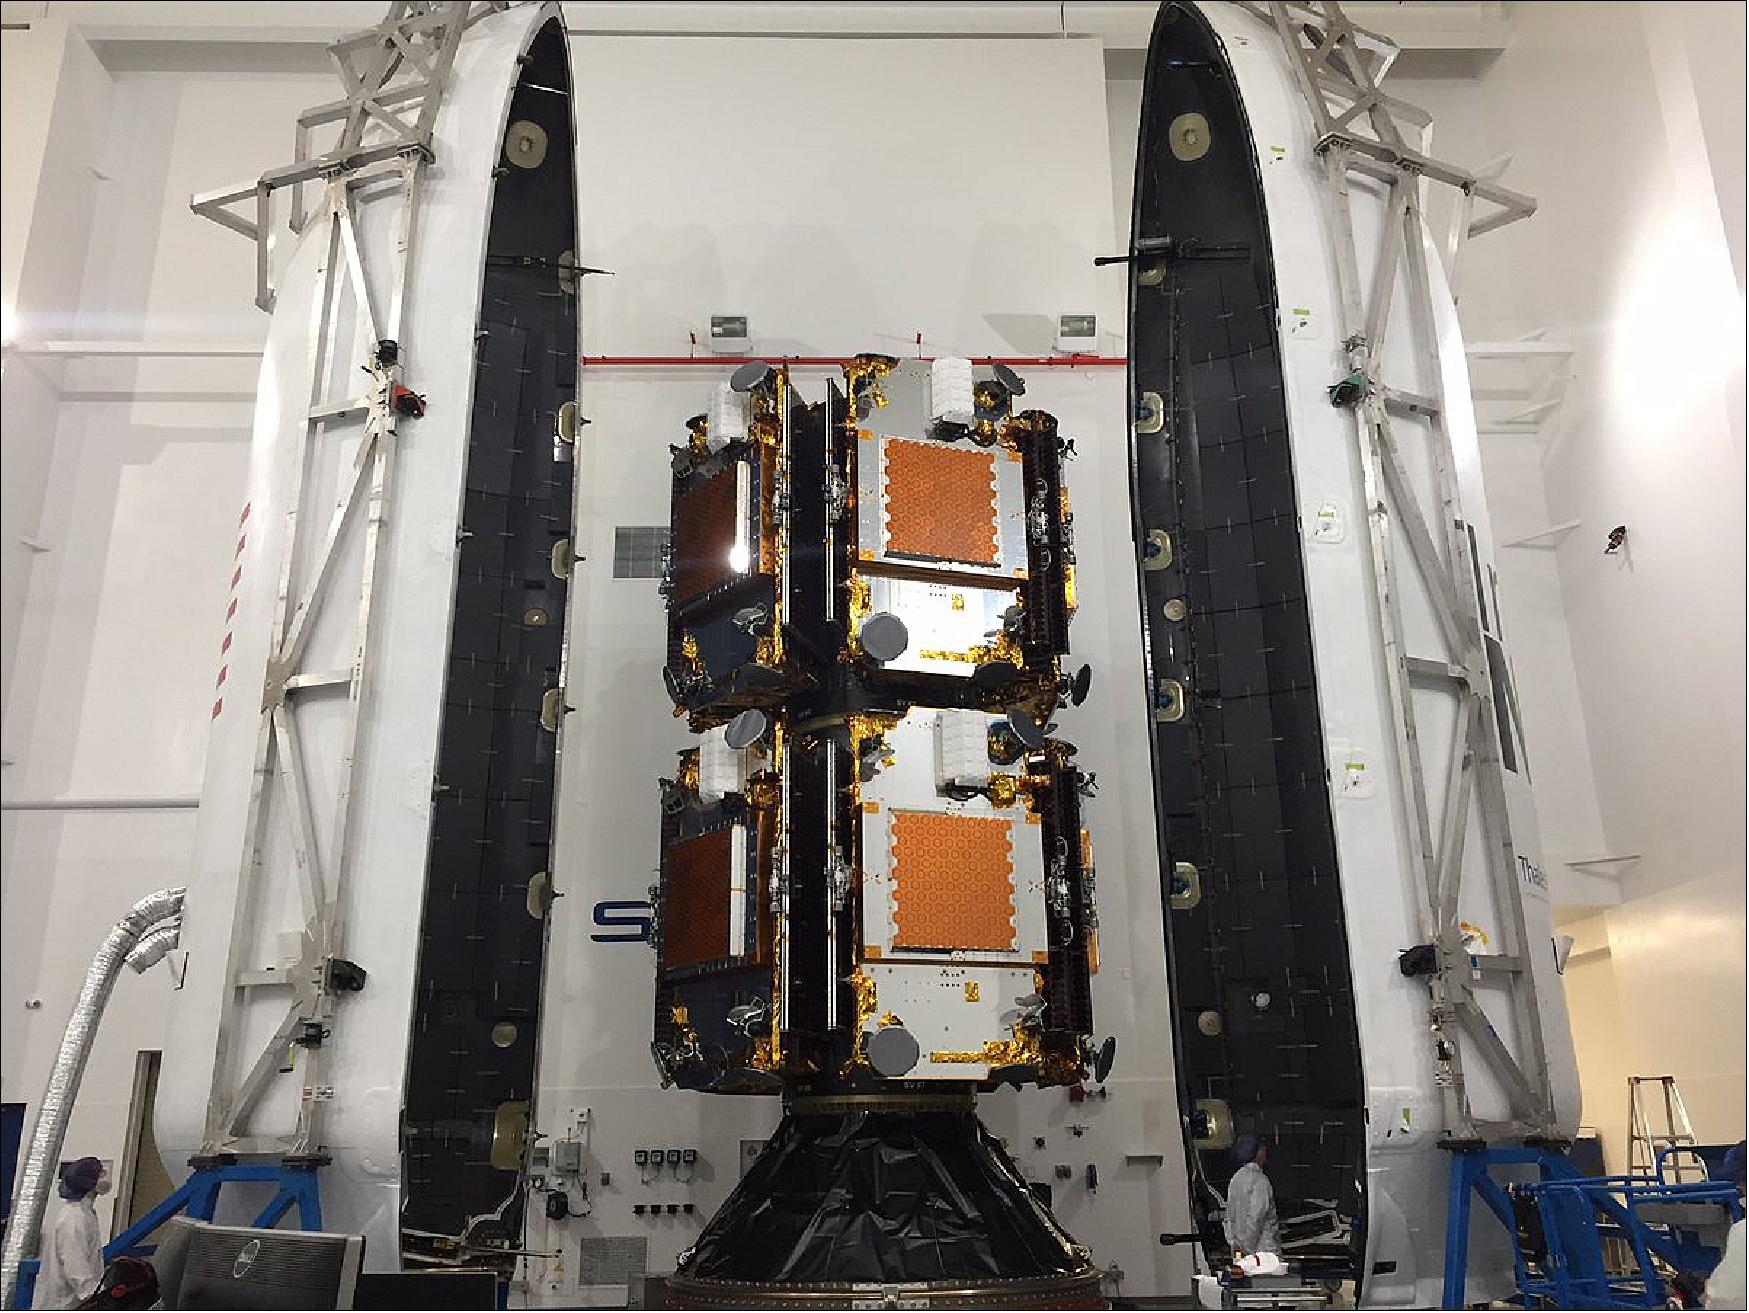 Figure 3: The first ten Iridium NEXT satellites are stacked and encapsulated in the Falcon 9 fairing for launch from Vandenberg Air Force Base, CA, in early 2017 (image credit: Iridium)